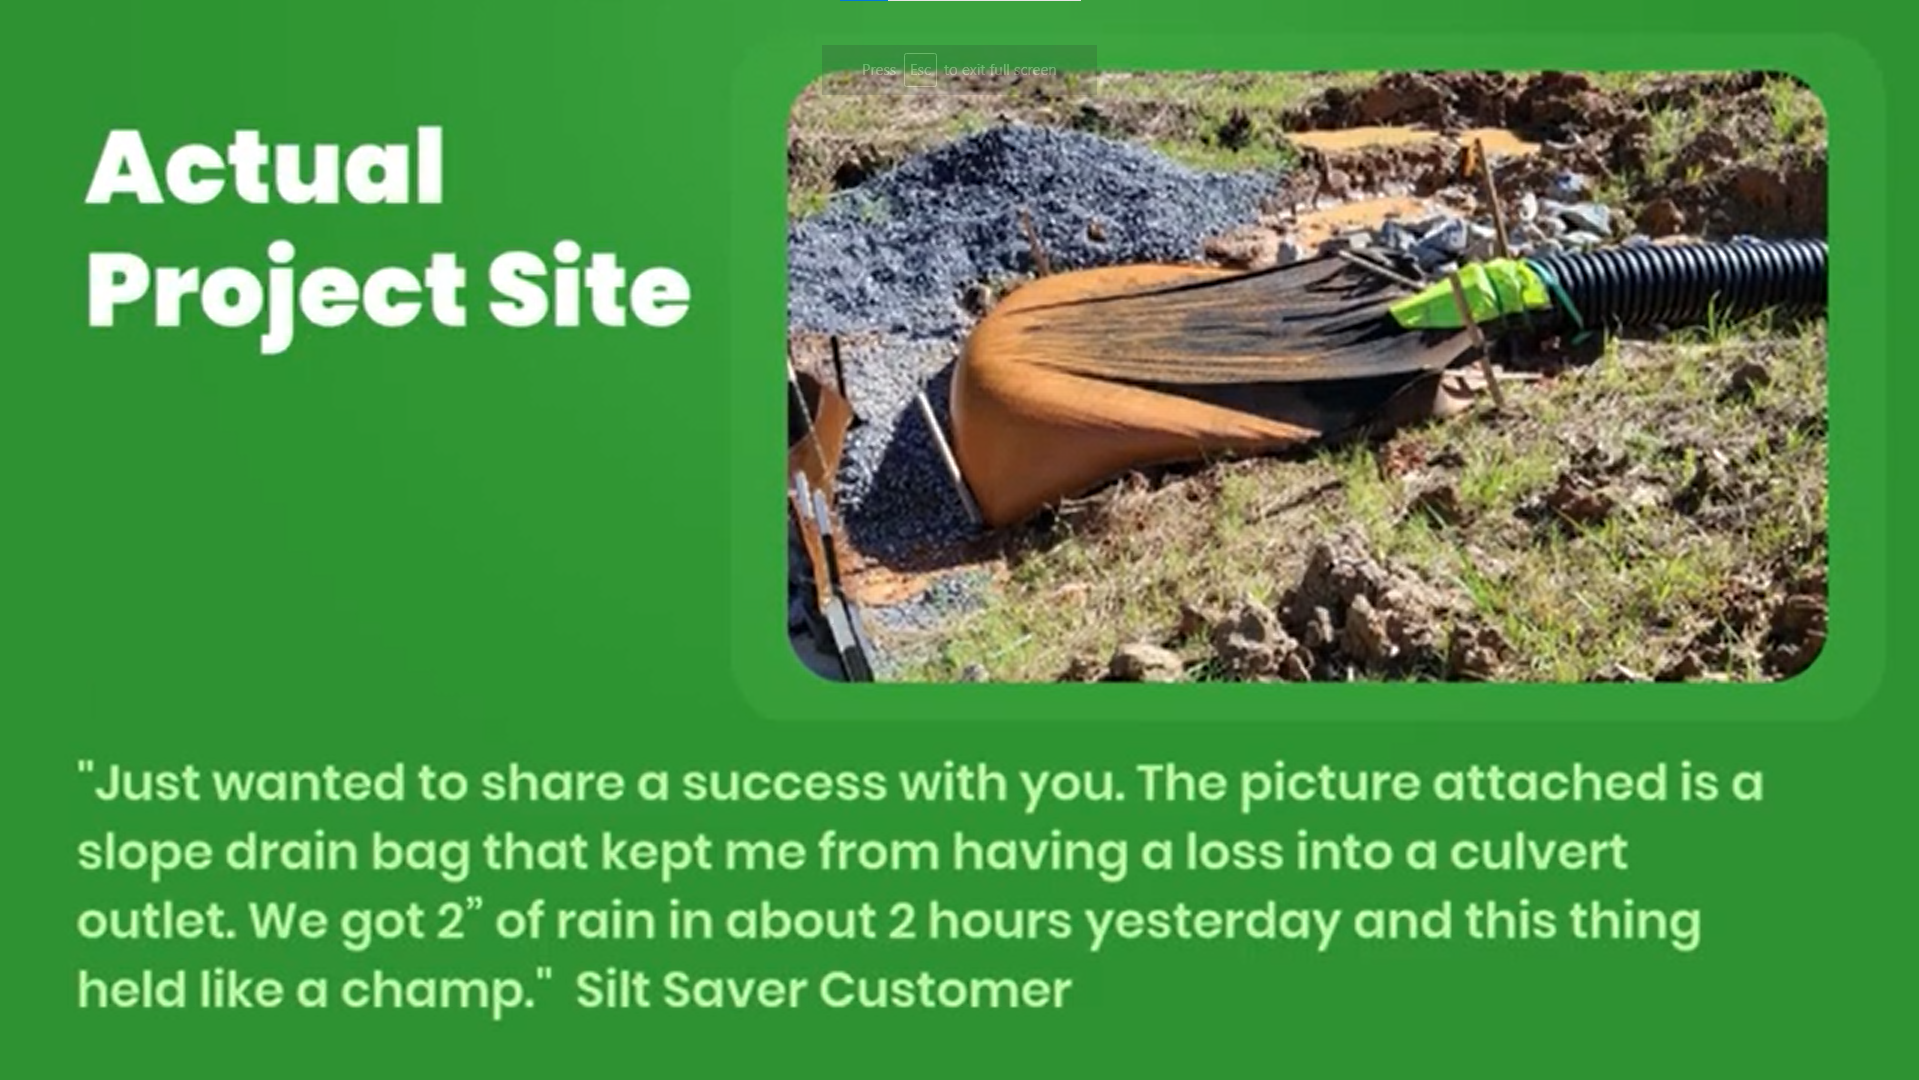 Silt Saver Slope Drain Bag retaining large amount of sediment with happy comment from customer